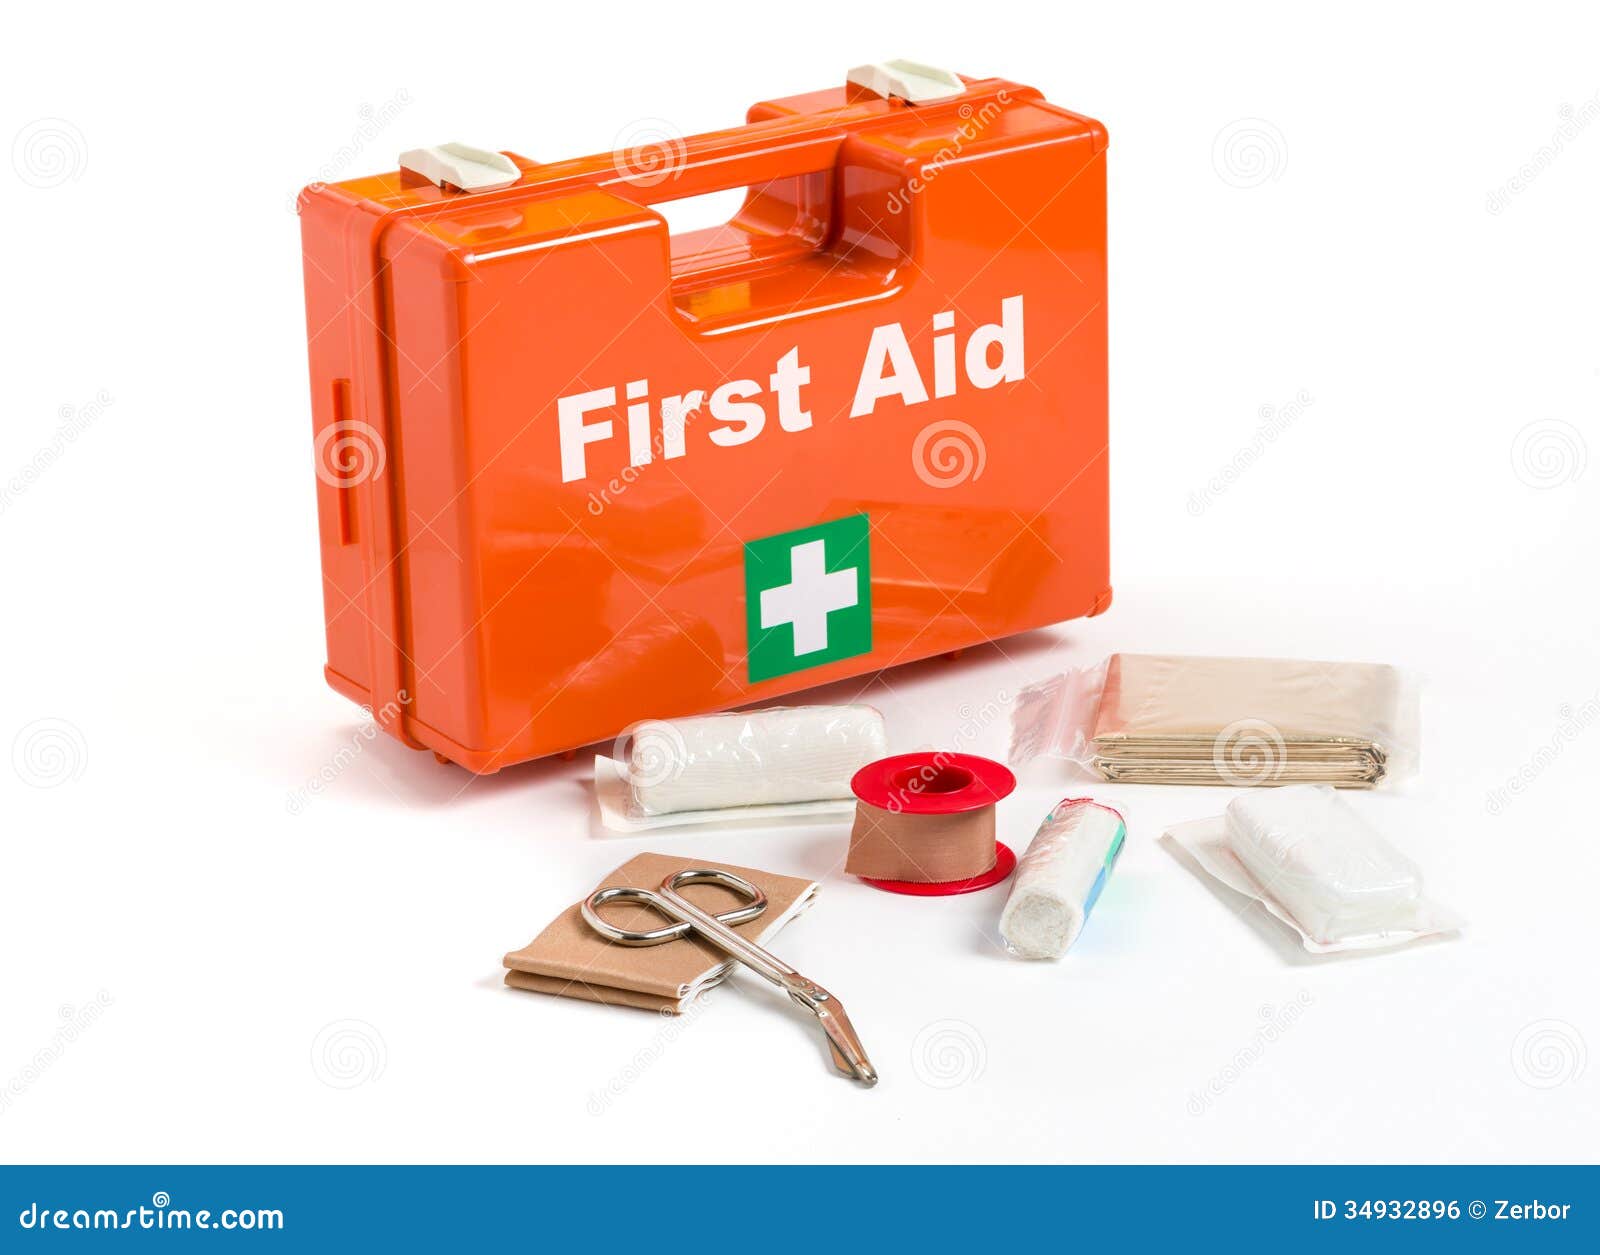 First Aid Materials Images The Y Guide - 23 roblox application photos free royalty free stock photos from dreamstime